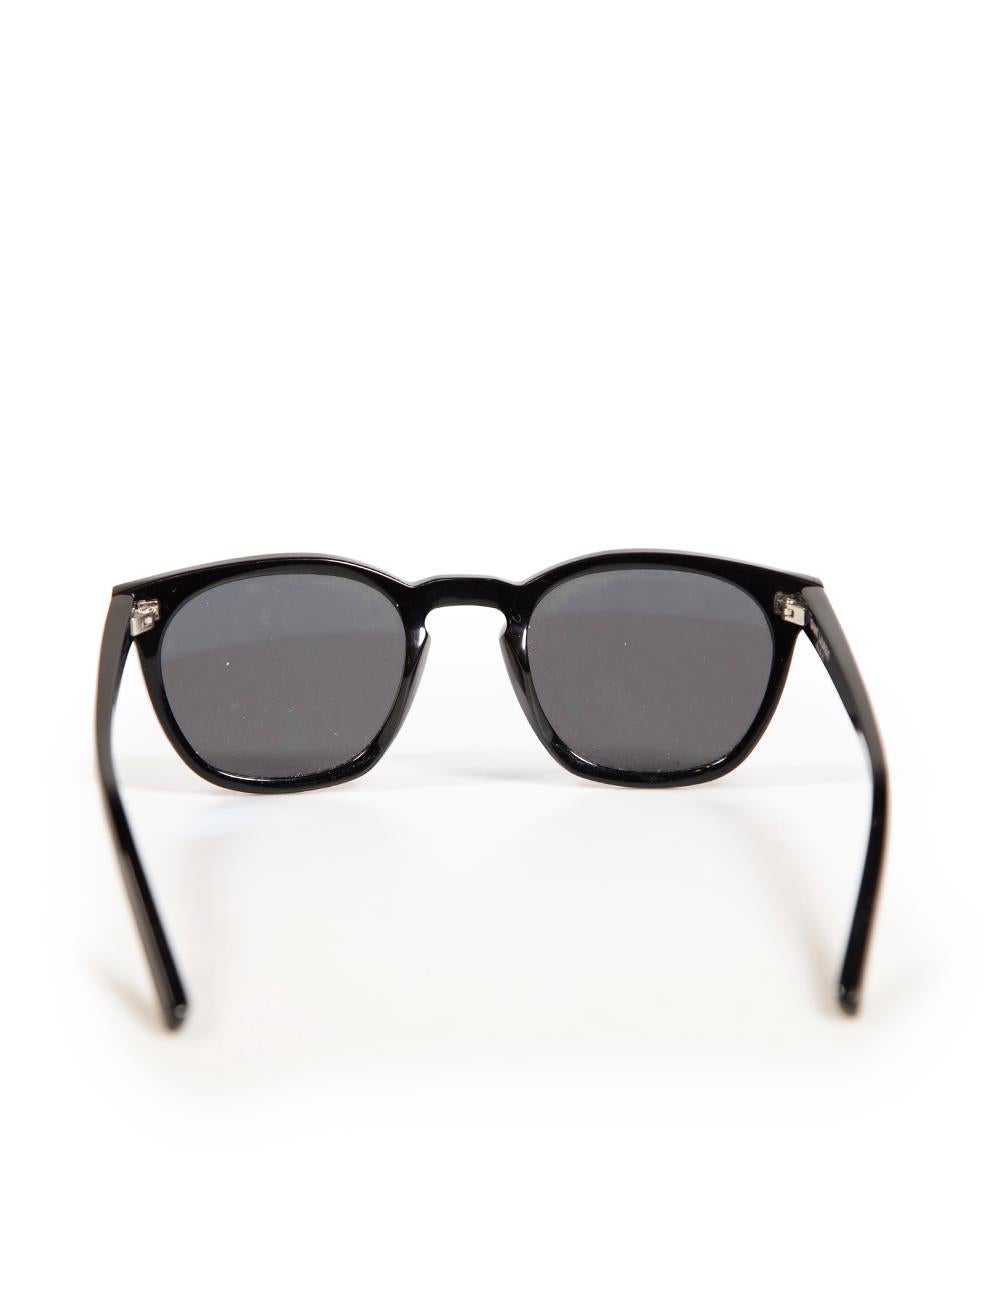 Saint Laurent Black SL28 Tinted Sunglasses In Excellent Condition In London, GB